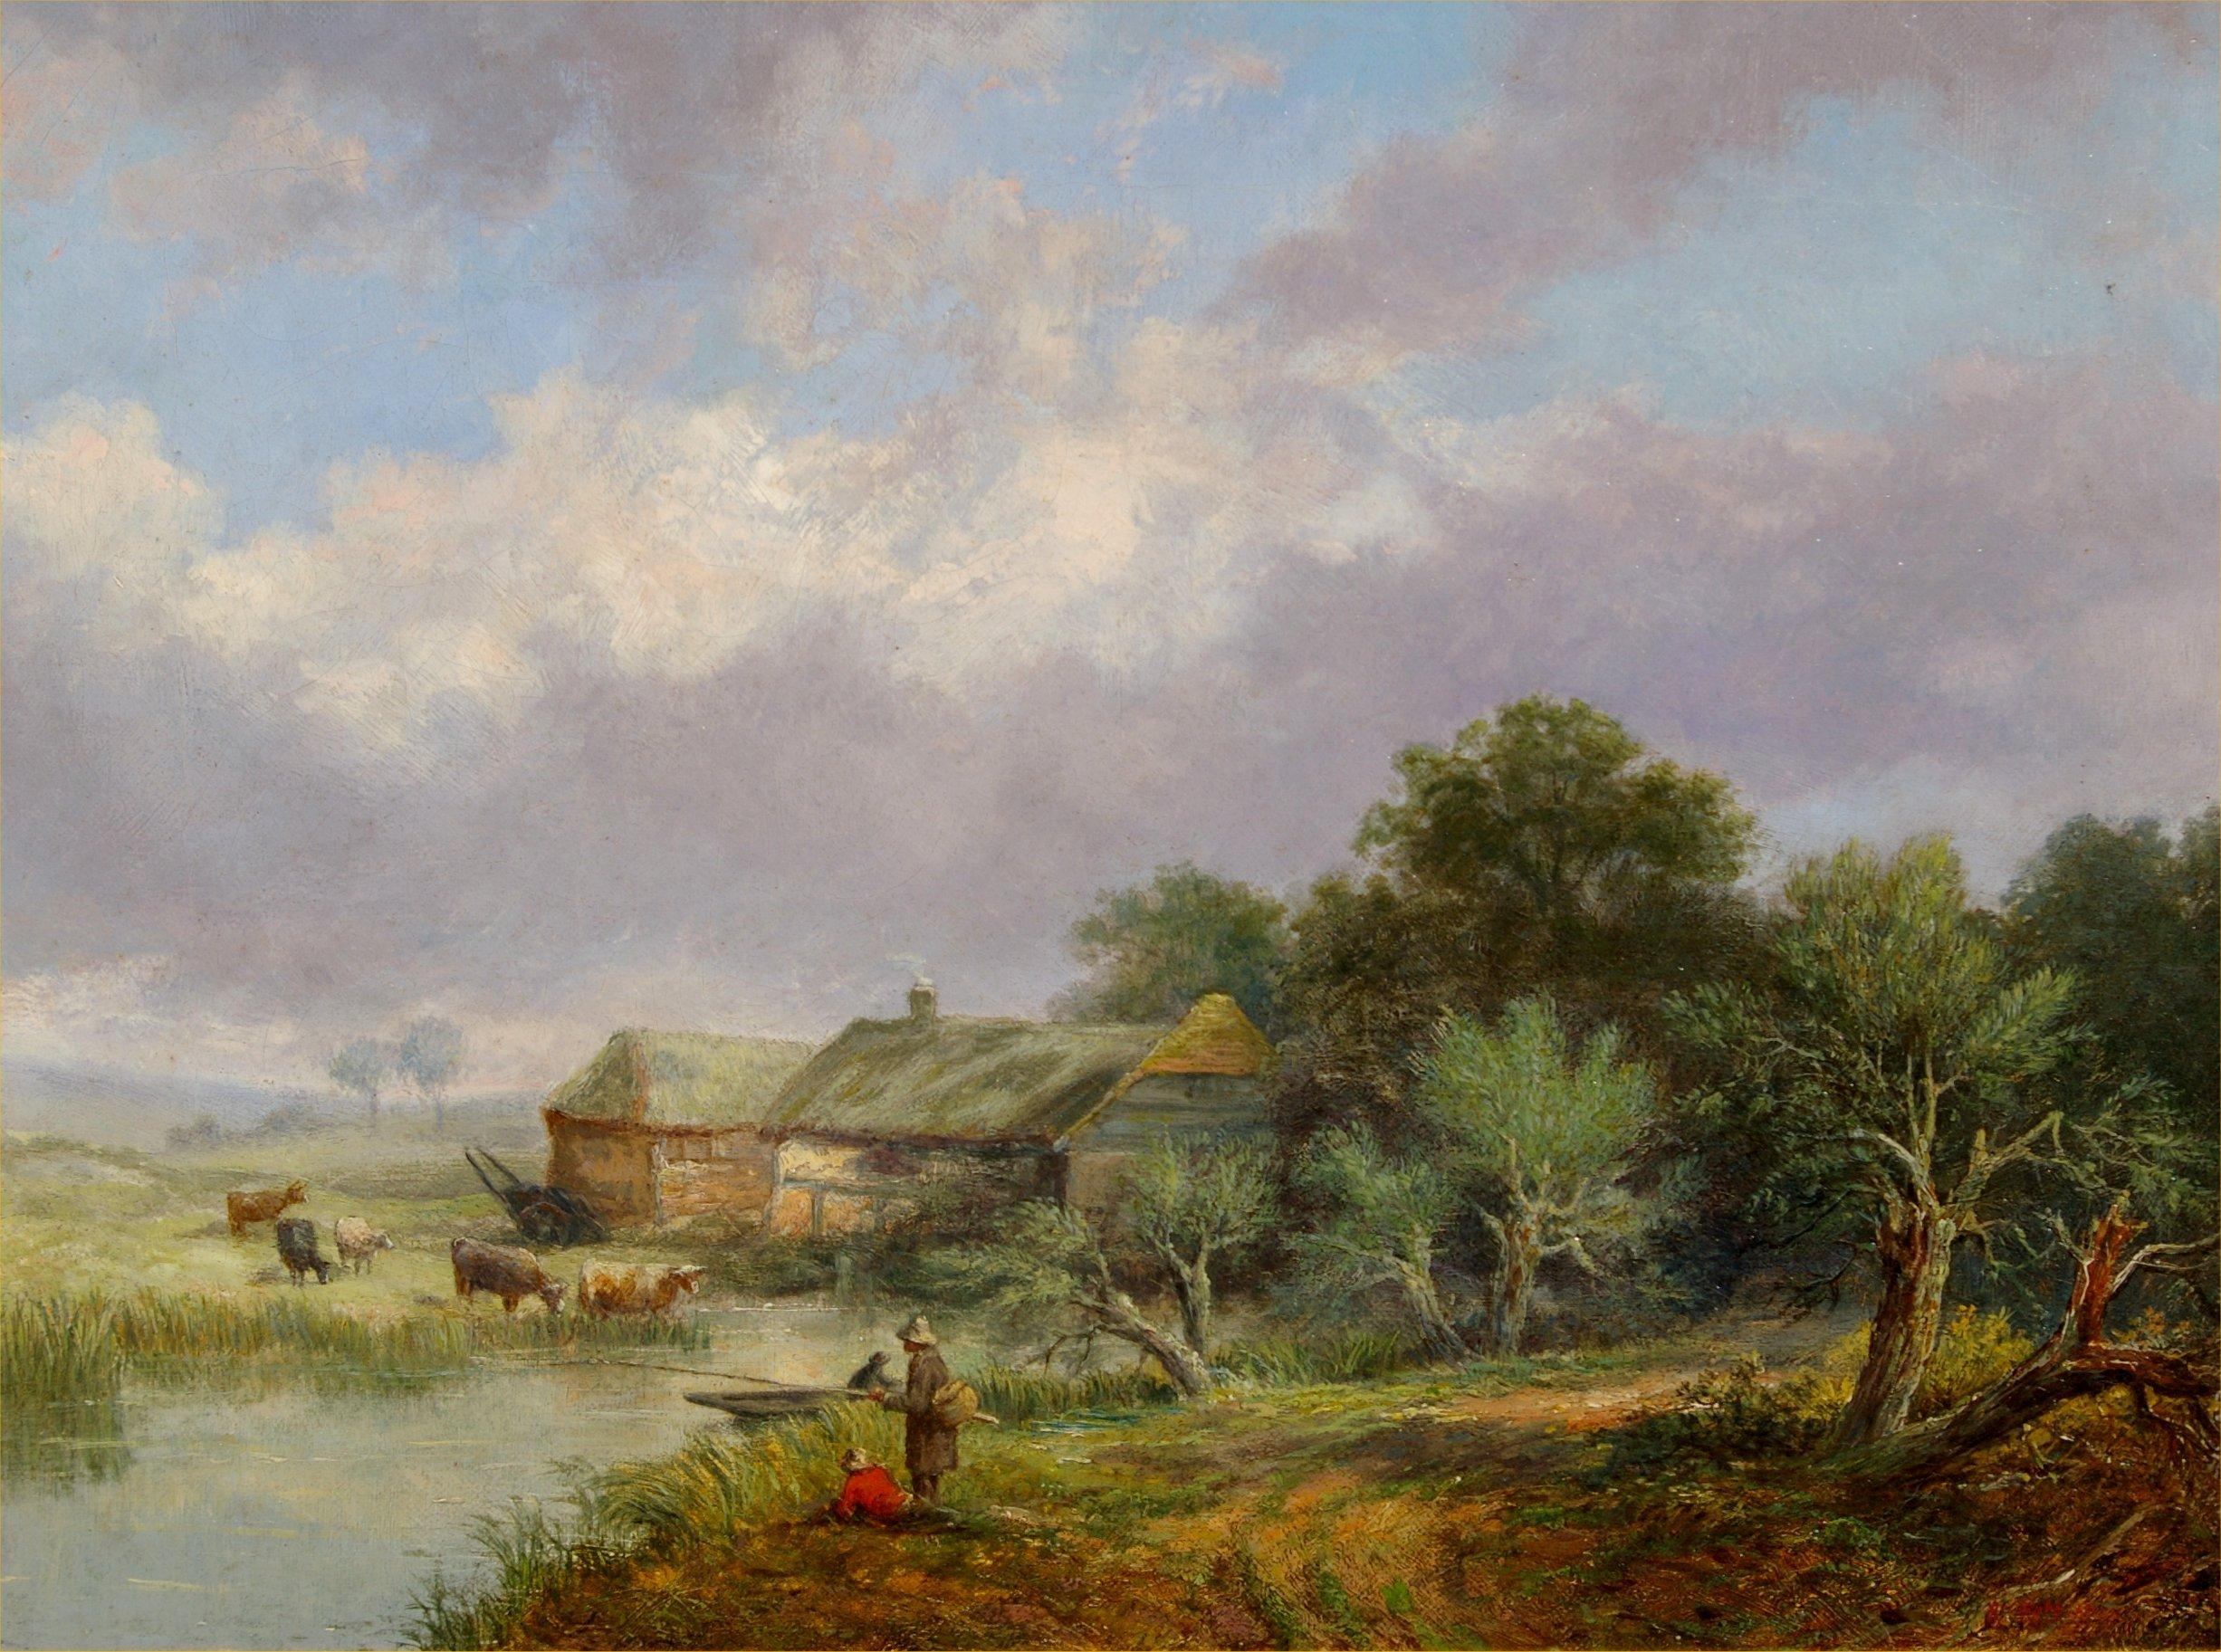 Fishing in the Stream - Painting by Alfred Pettitt